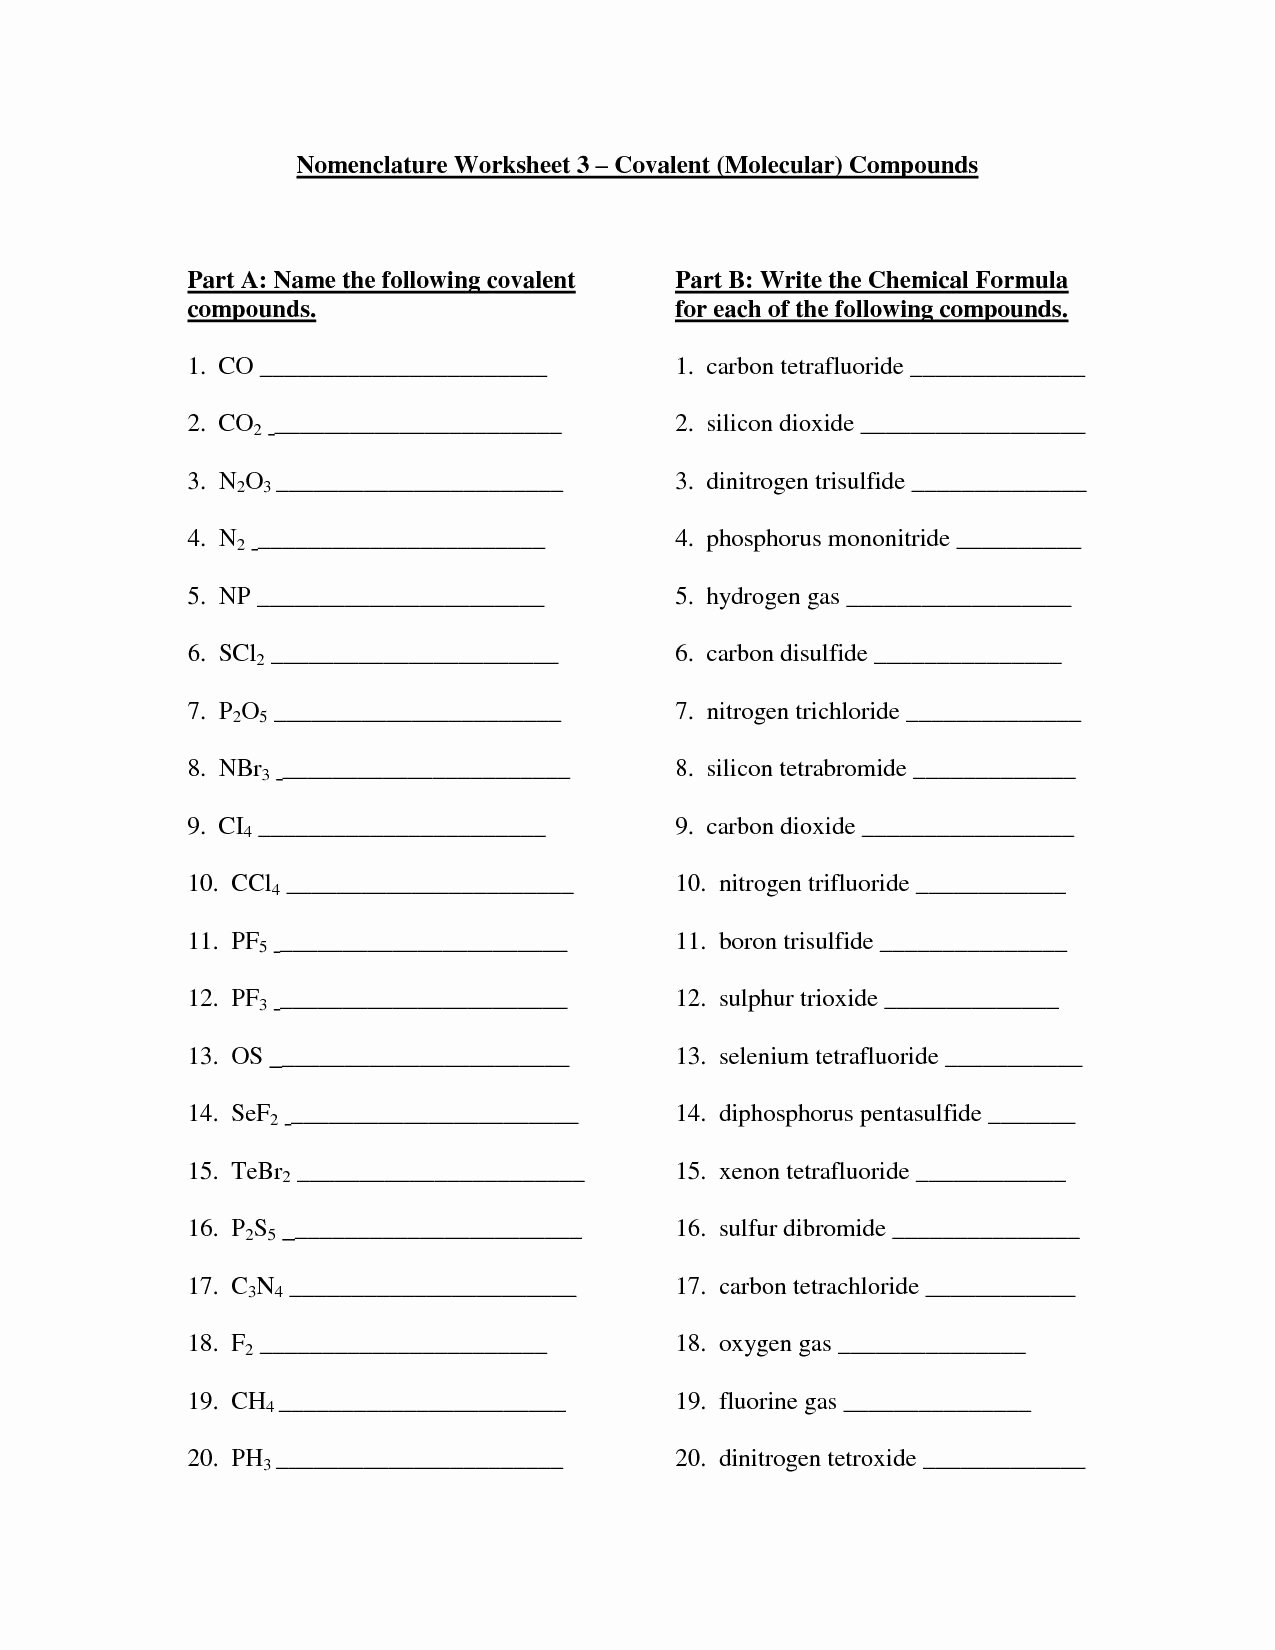 Overview Chemical Bonds Worksheet Answers Inspirational Naming Covalent Pounds Worksheet Answers